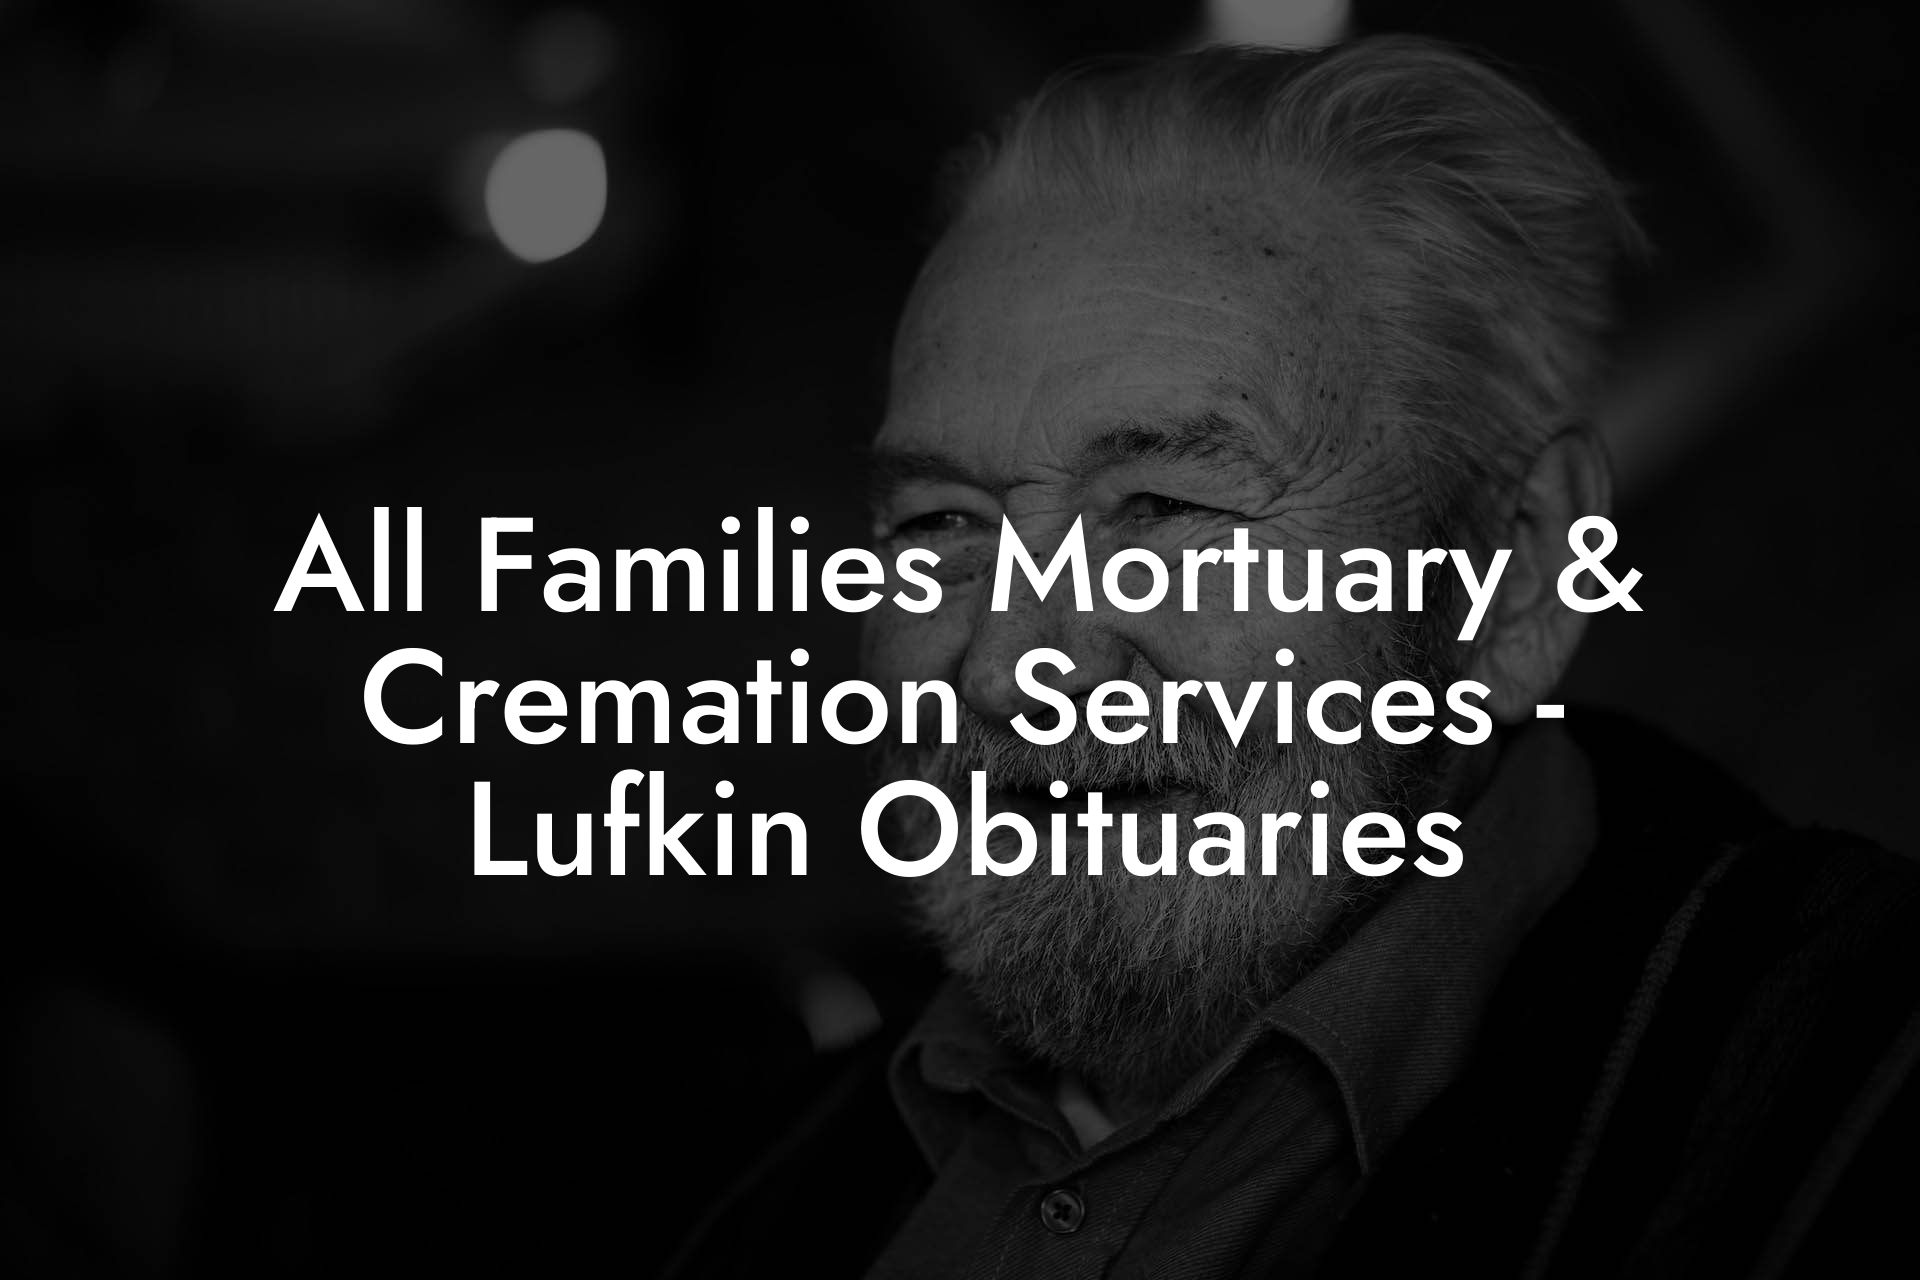 All Families Mortuary & Cremation Services - Lufkin Obituaries